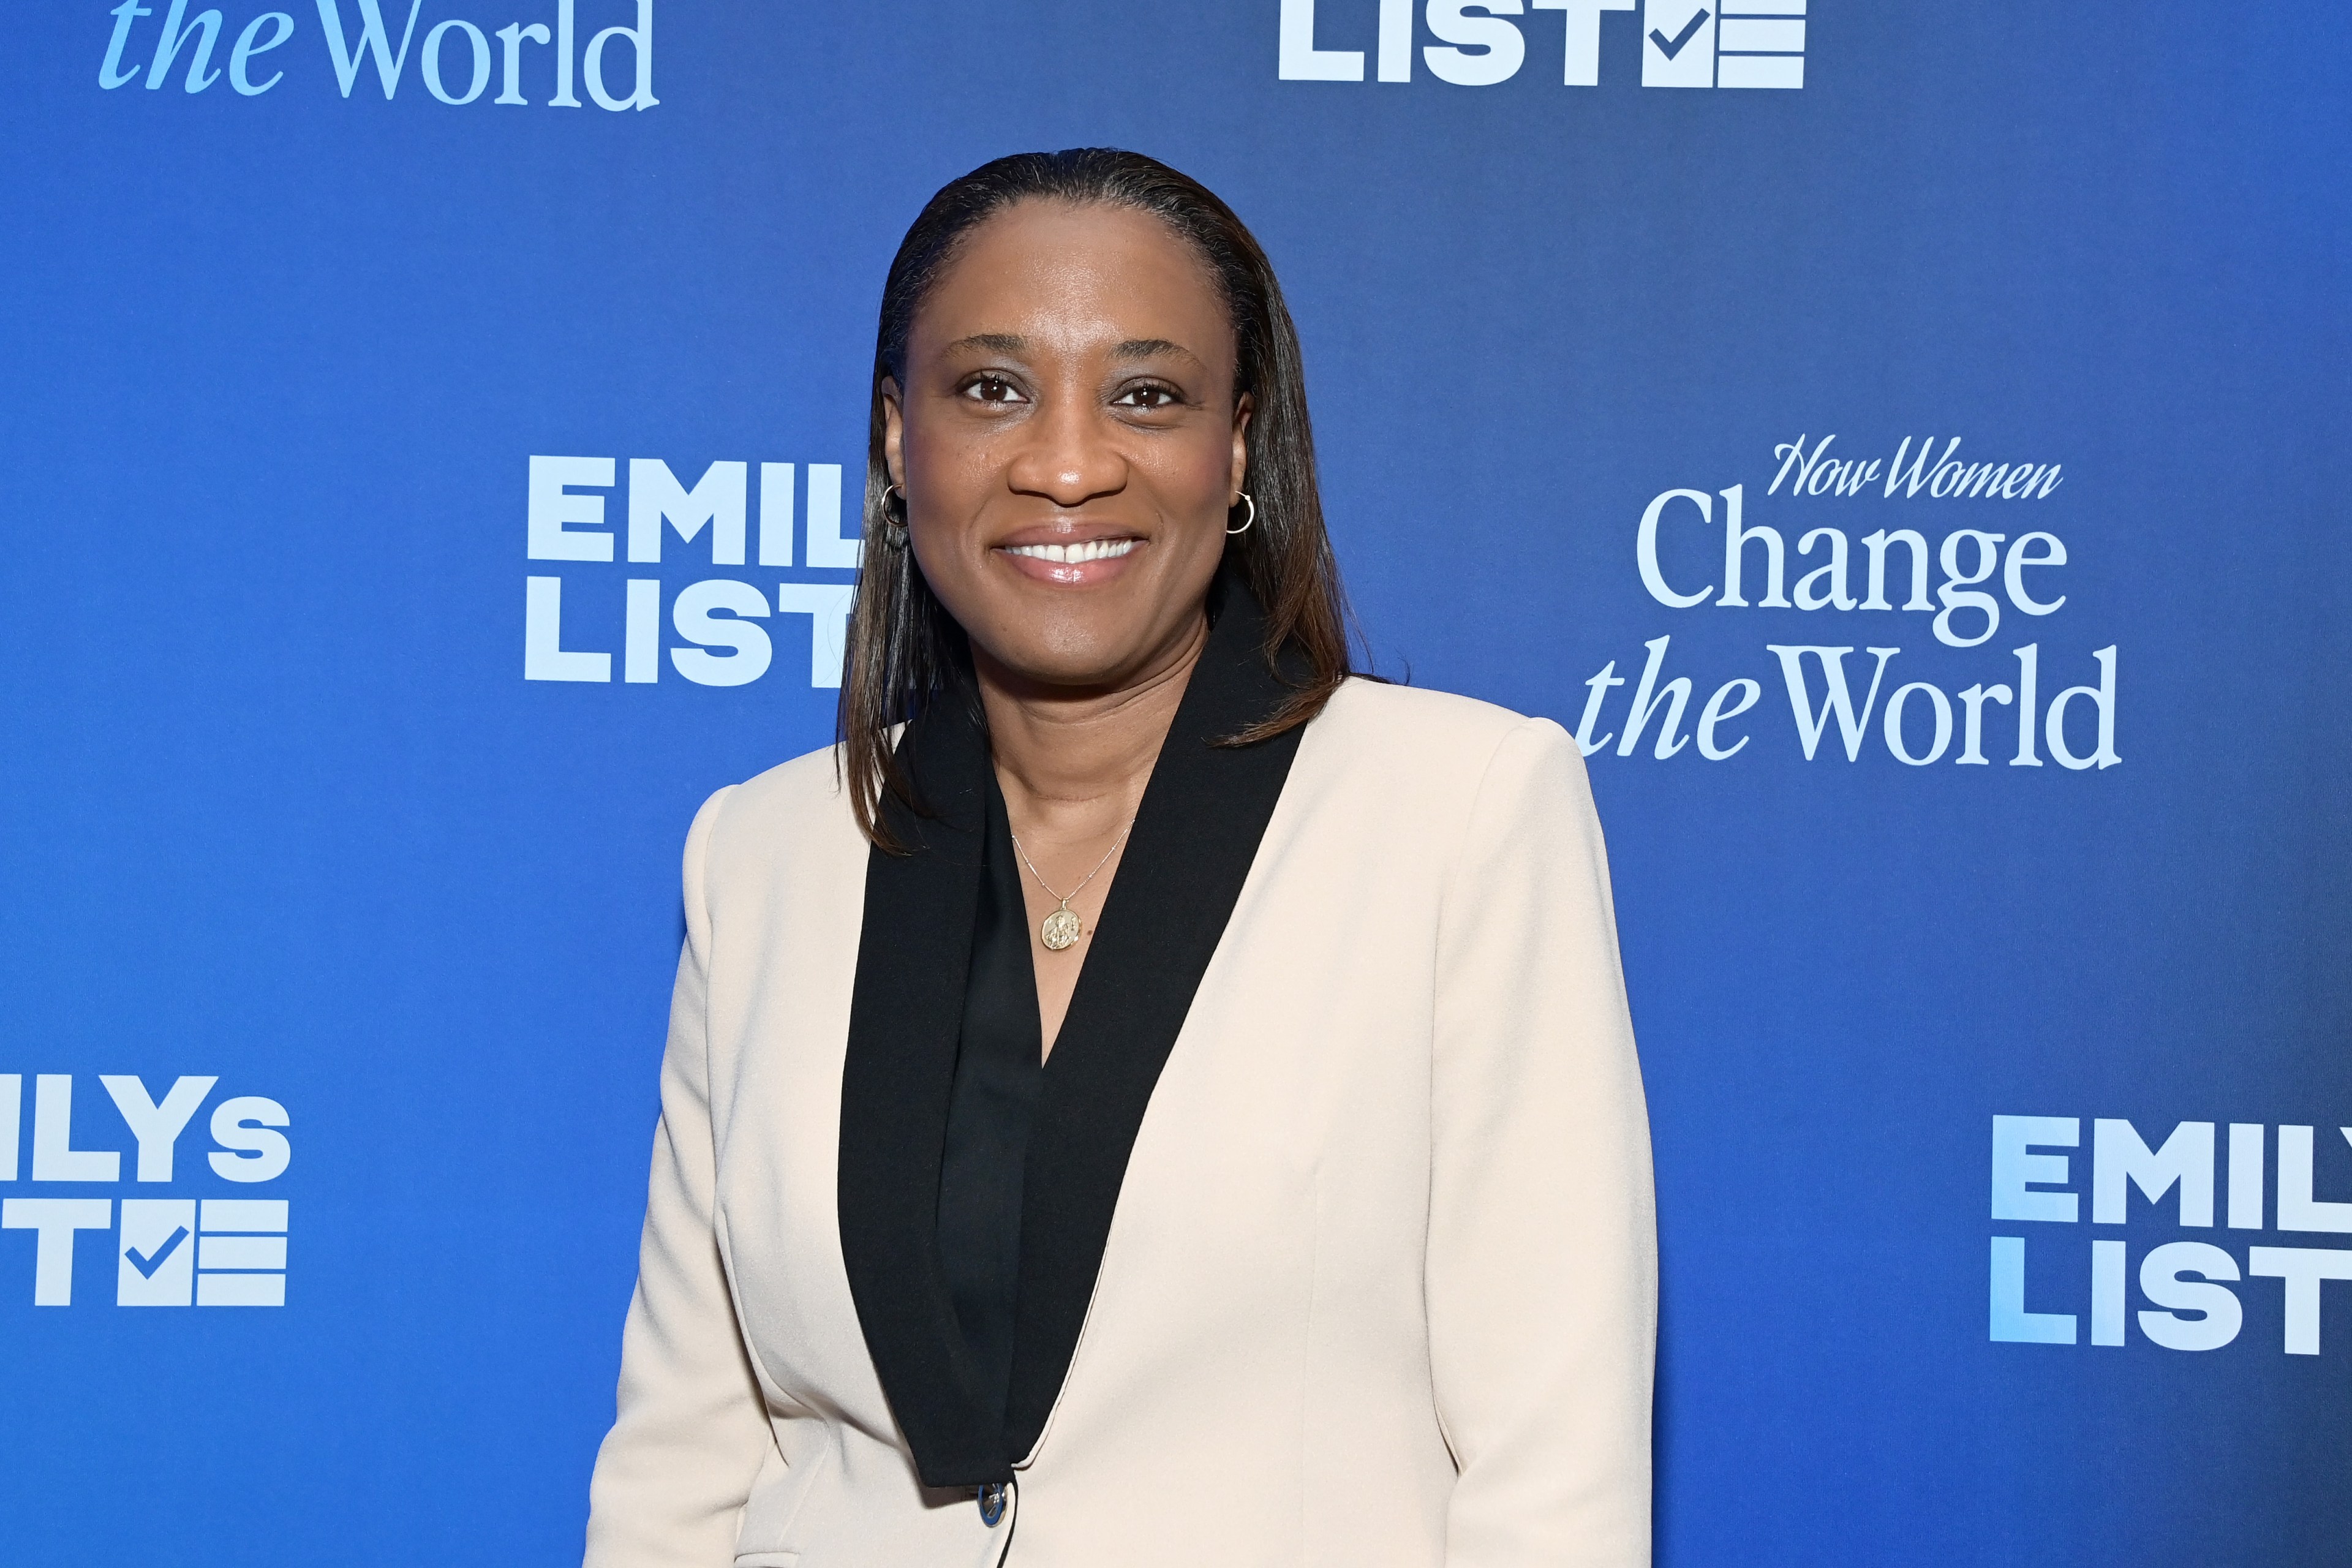 A smiling woman in a beige blazer stands before a blue backdrop with the text "EMILY's LIST" and "How Women Change the World."